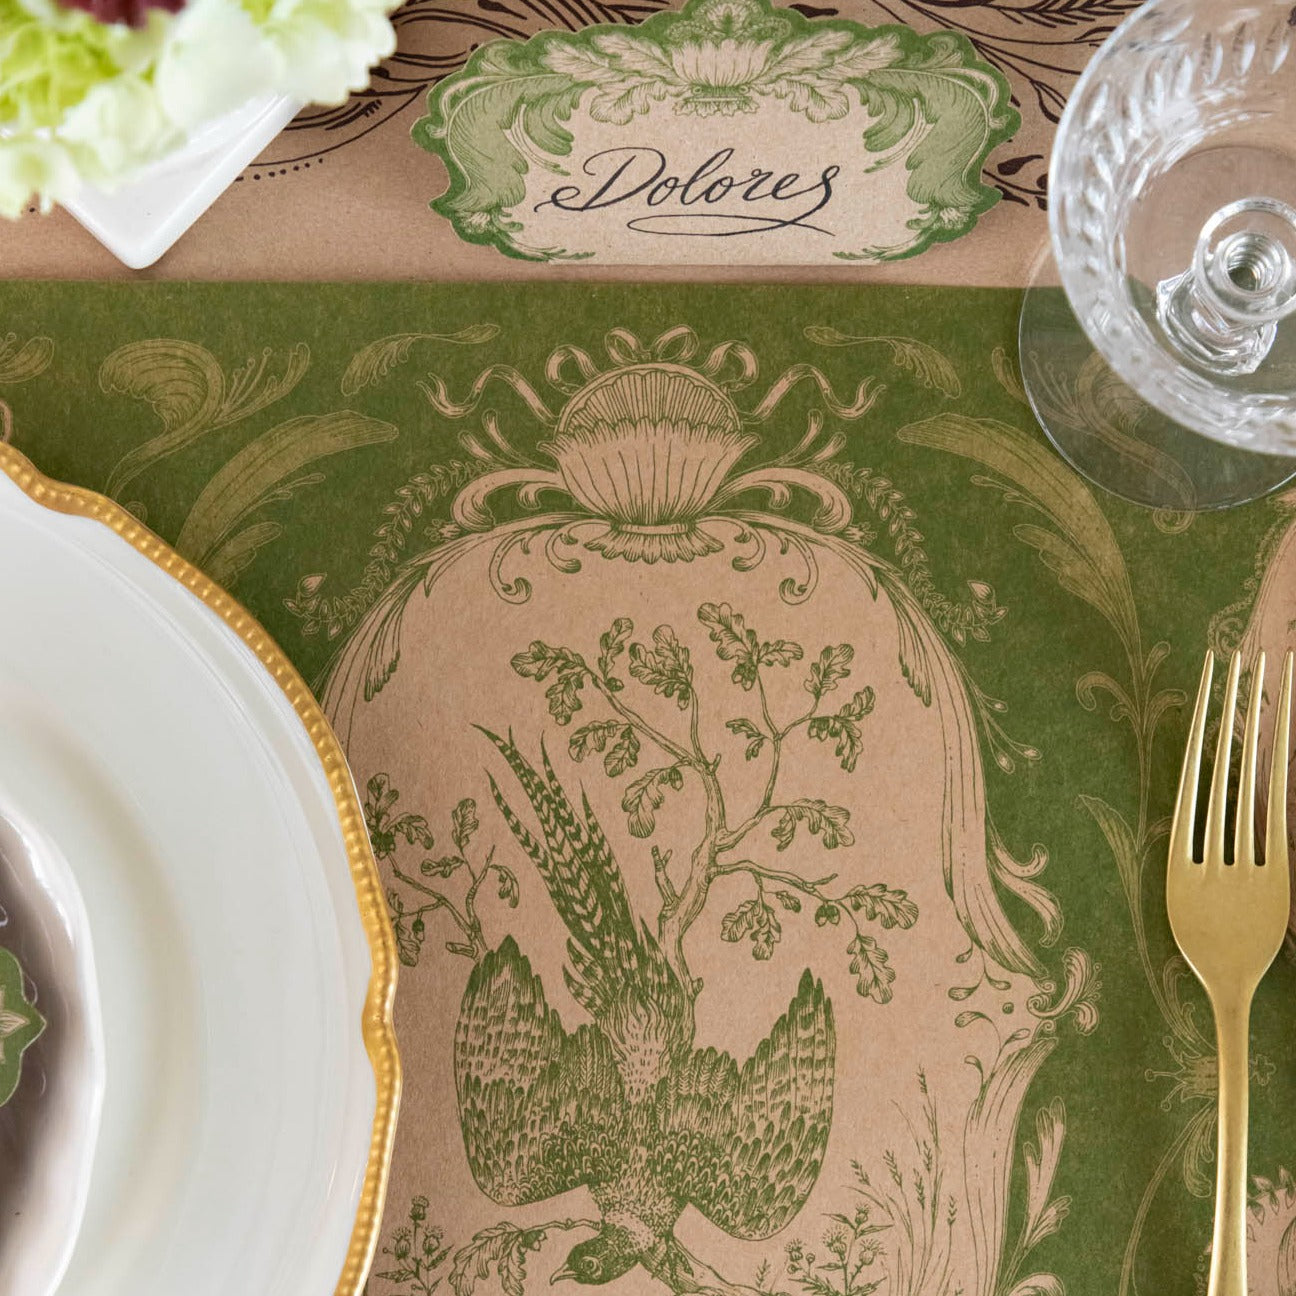 Close-up of the Moss Fable Toile Placemat under a place setting, showing the peasant illustration in detail.